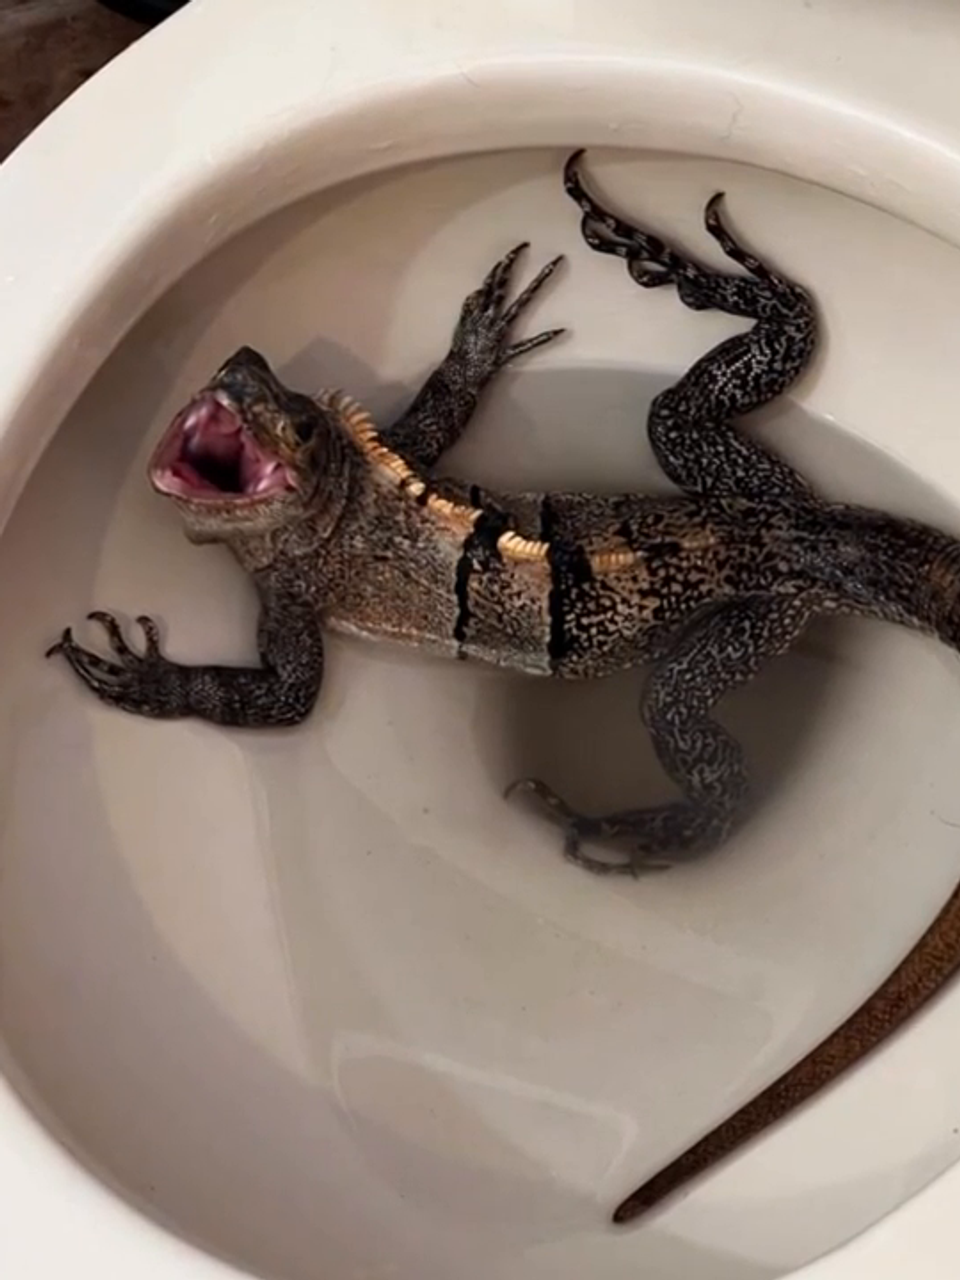 Florida Man Finds Hissing Iguana In Toilet